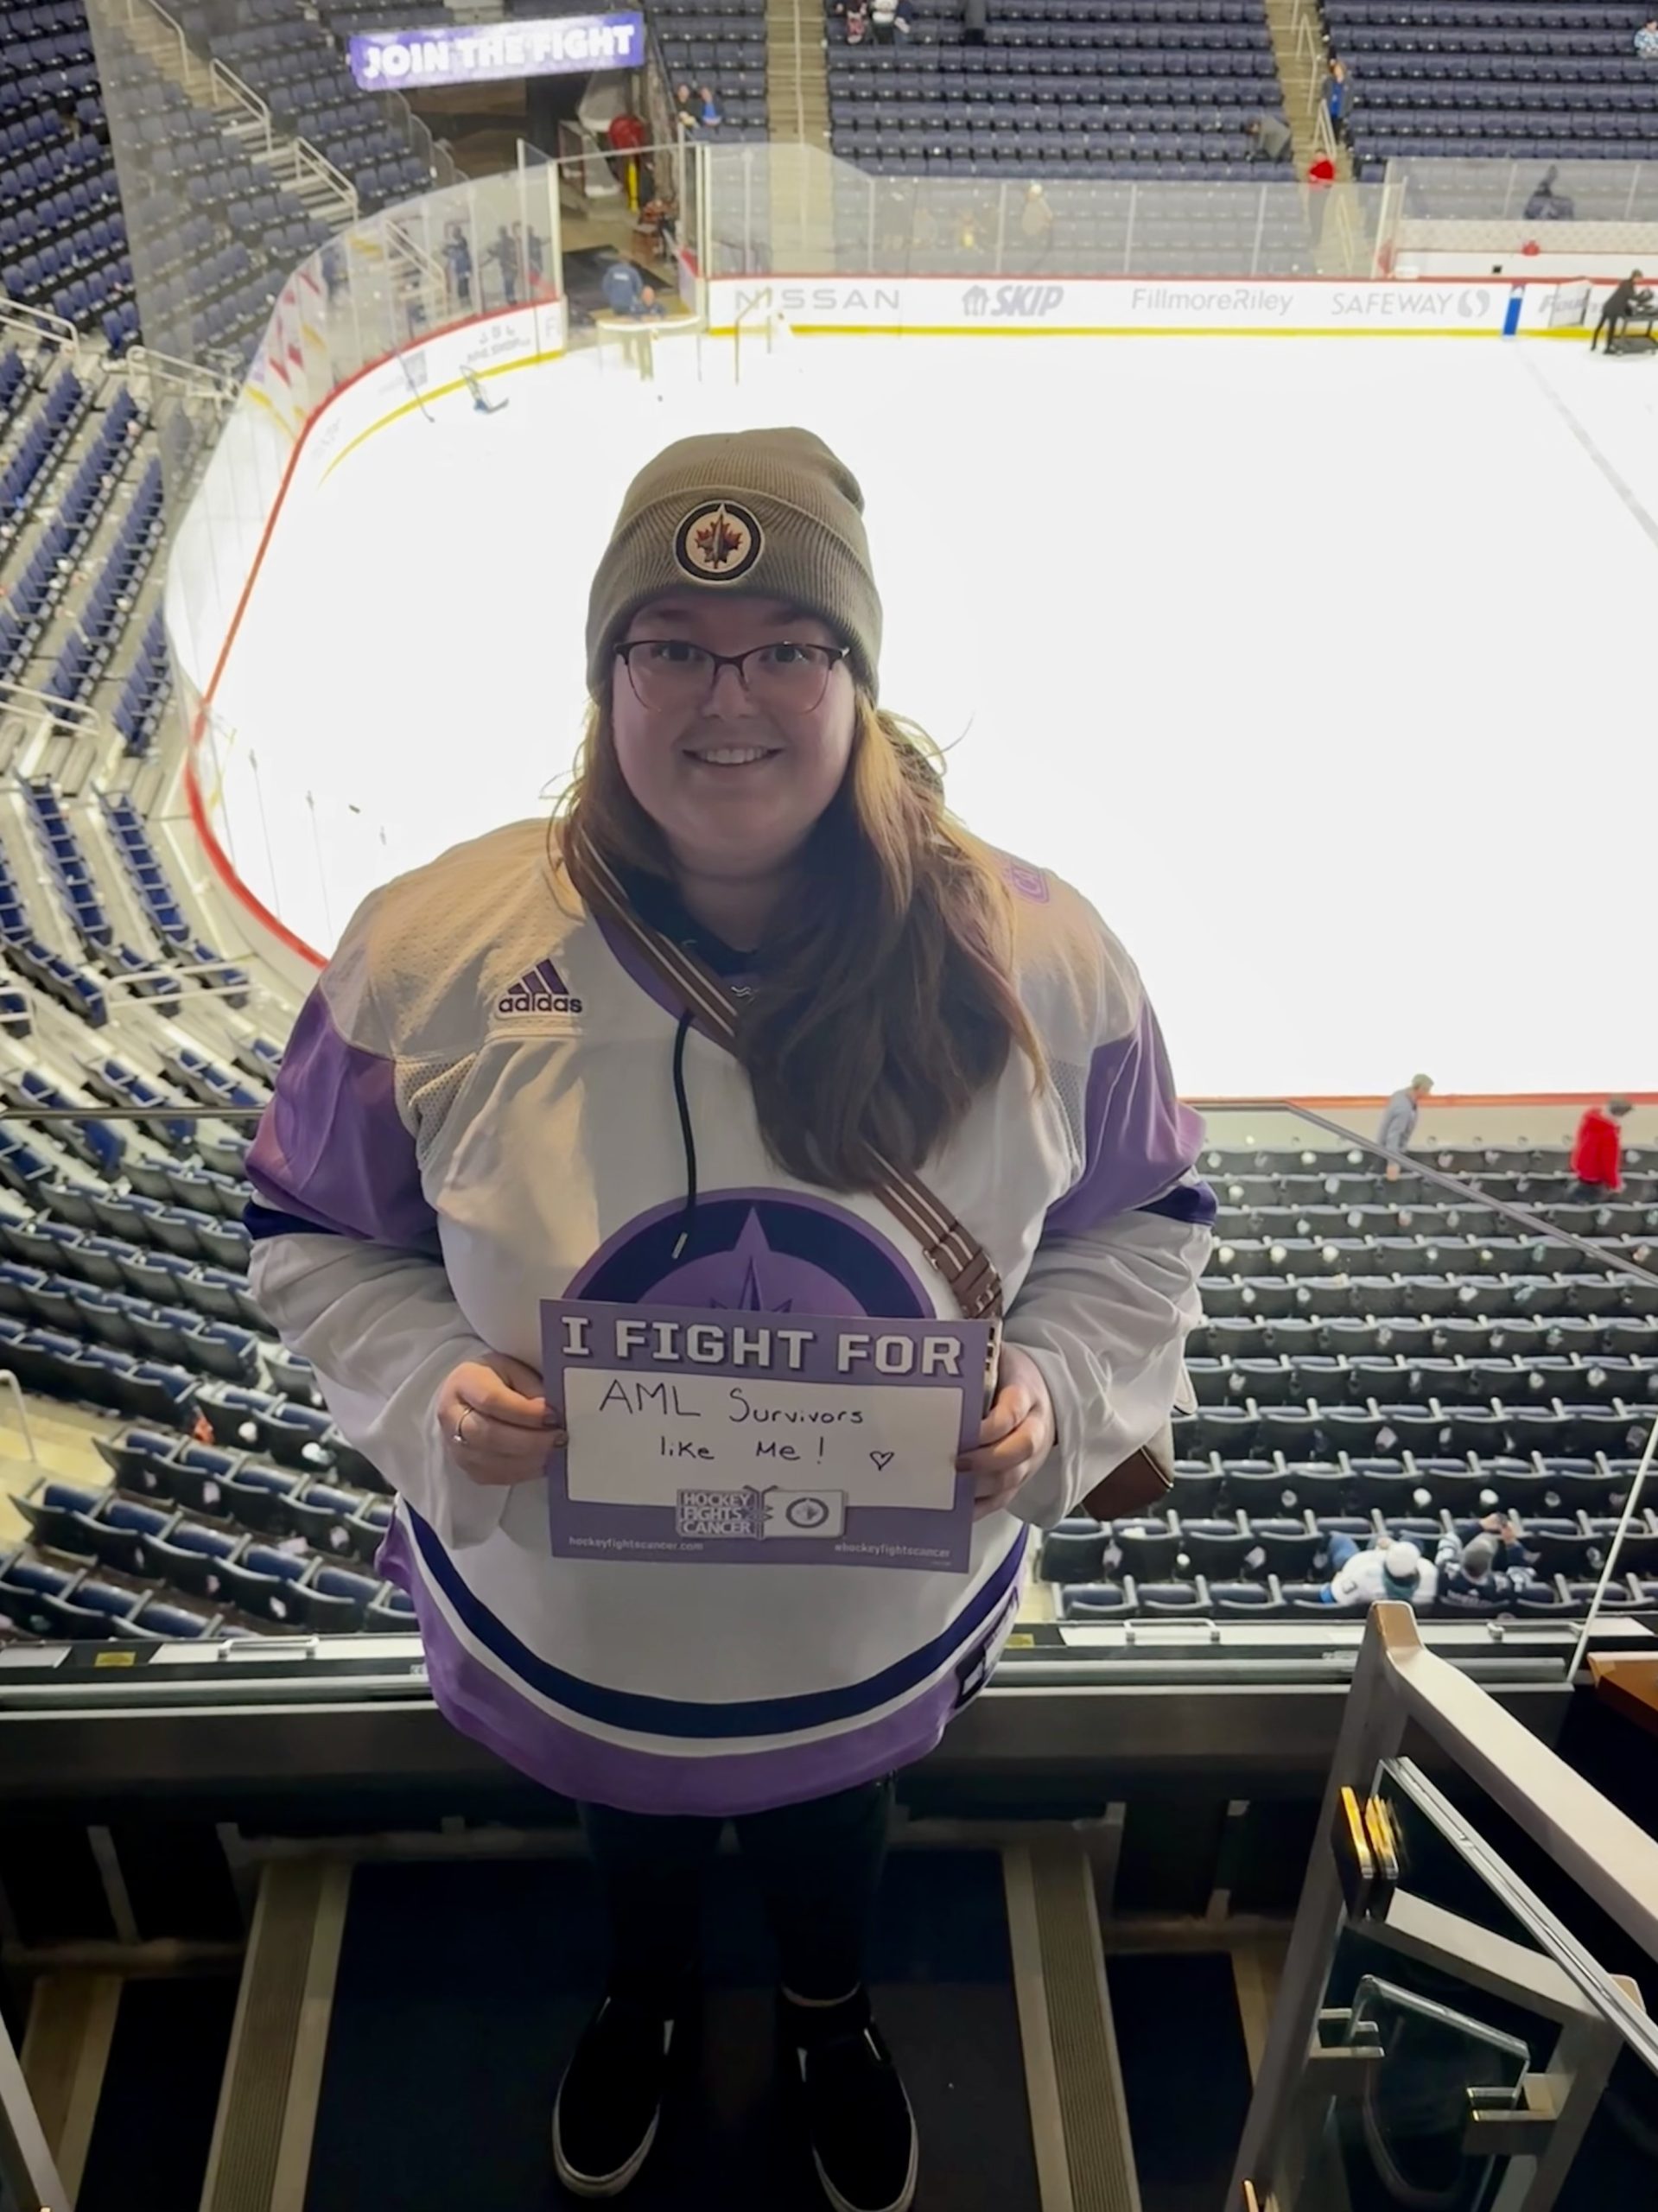 A photo of Michaela standing inside of a hockey arena, smiling, wearing a grey hat and a purple "hockey fights cancer" Winnipeg Jets jersey, holding a sign that says "I fight for AML survivors like me."